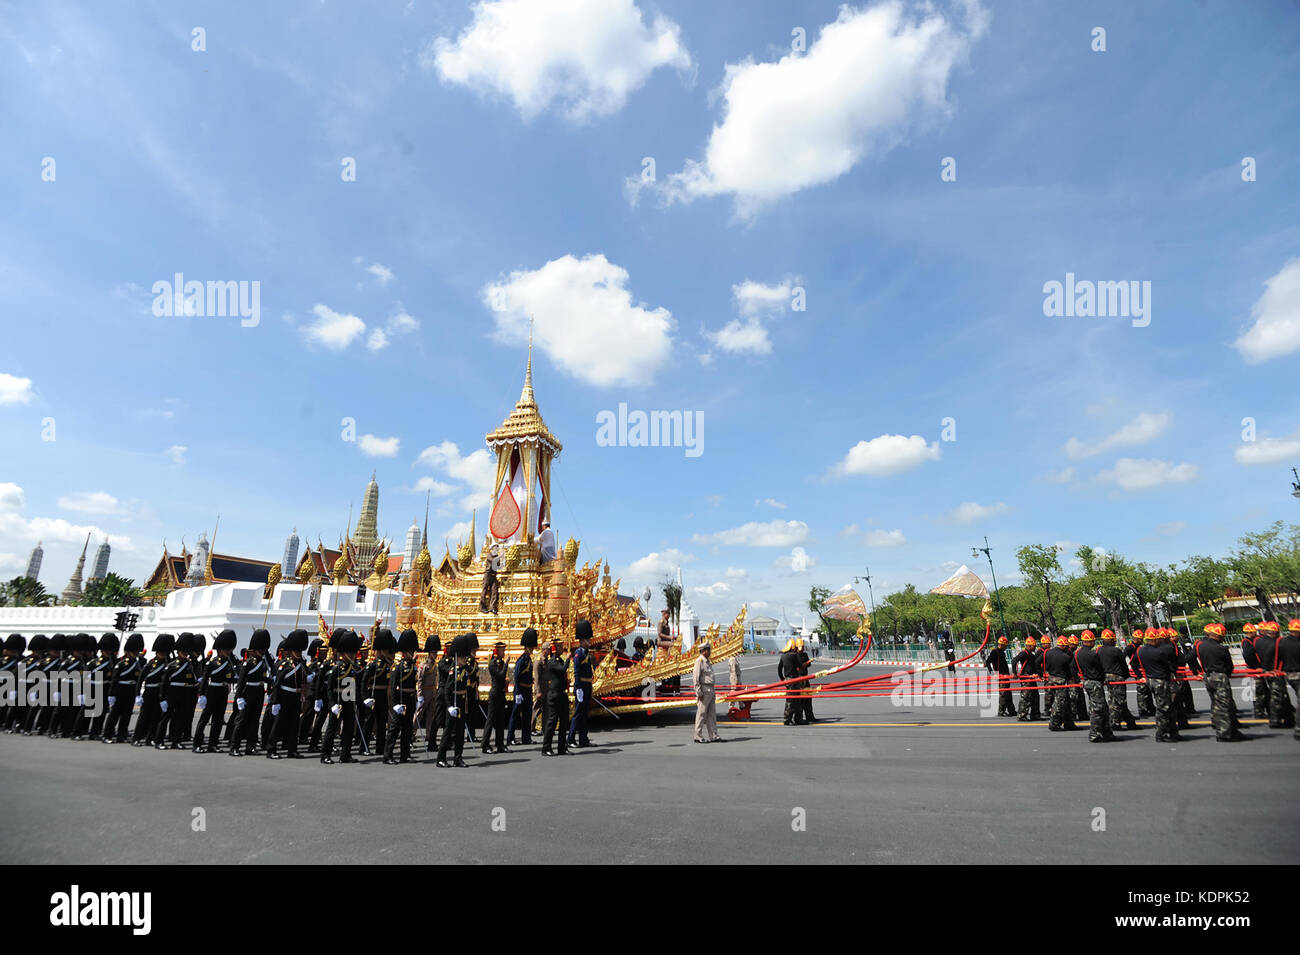 Bangkok, Thailand. 15th Oct, 2017. Soldiers and honour guard escort the royal chariot during the second rehearsal for the funeral of the late Thai King Bhumibol Adulyadej near the Grand Palace in Bangkok, Thailand, Oct. 15, 2017. The royal funeral for King Bhumibol Adulyadej is scheduled from Oct. 25 to 29. Credit: Rachen Sageamsak/Xinhua/Alamy Live News Stock Photo